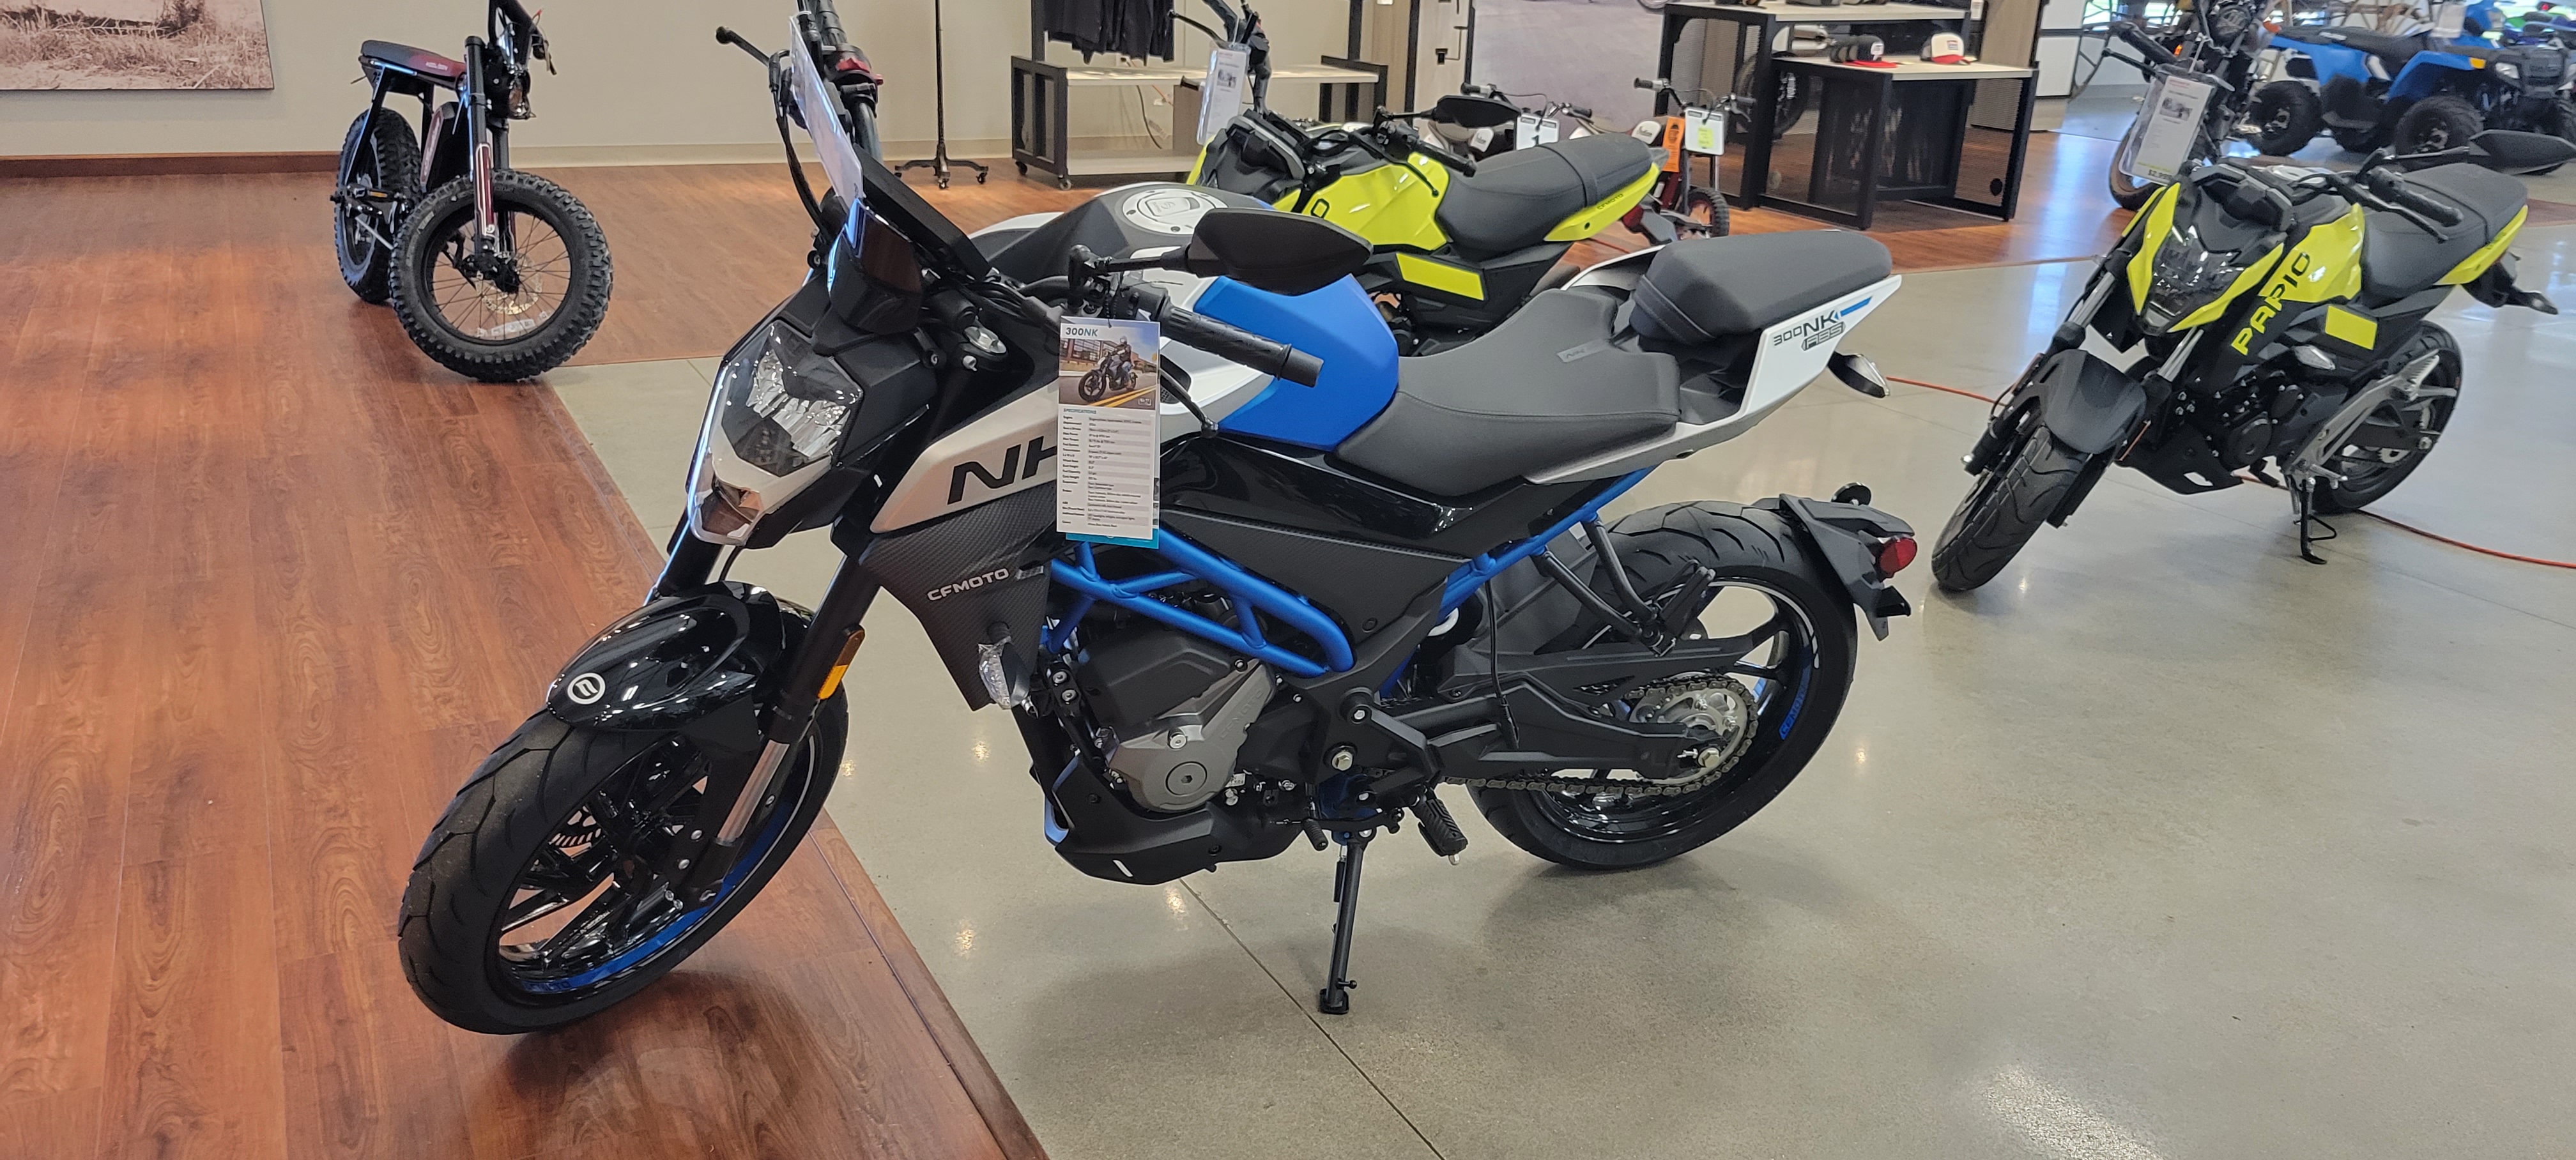 2022 CFMOTO 300 NK at Brenny's Motorcycle Clinic, Bettendorf, IA 52722